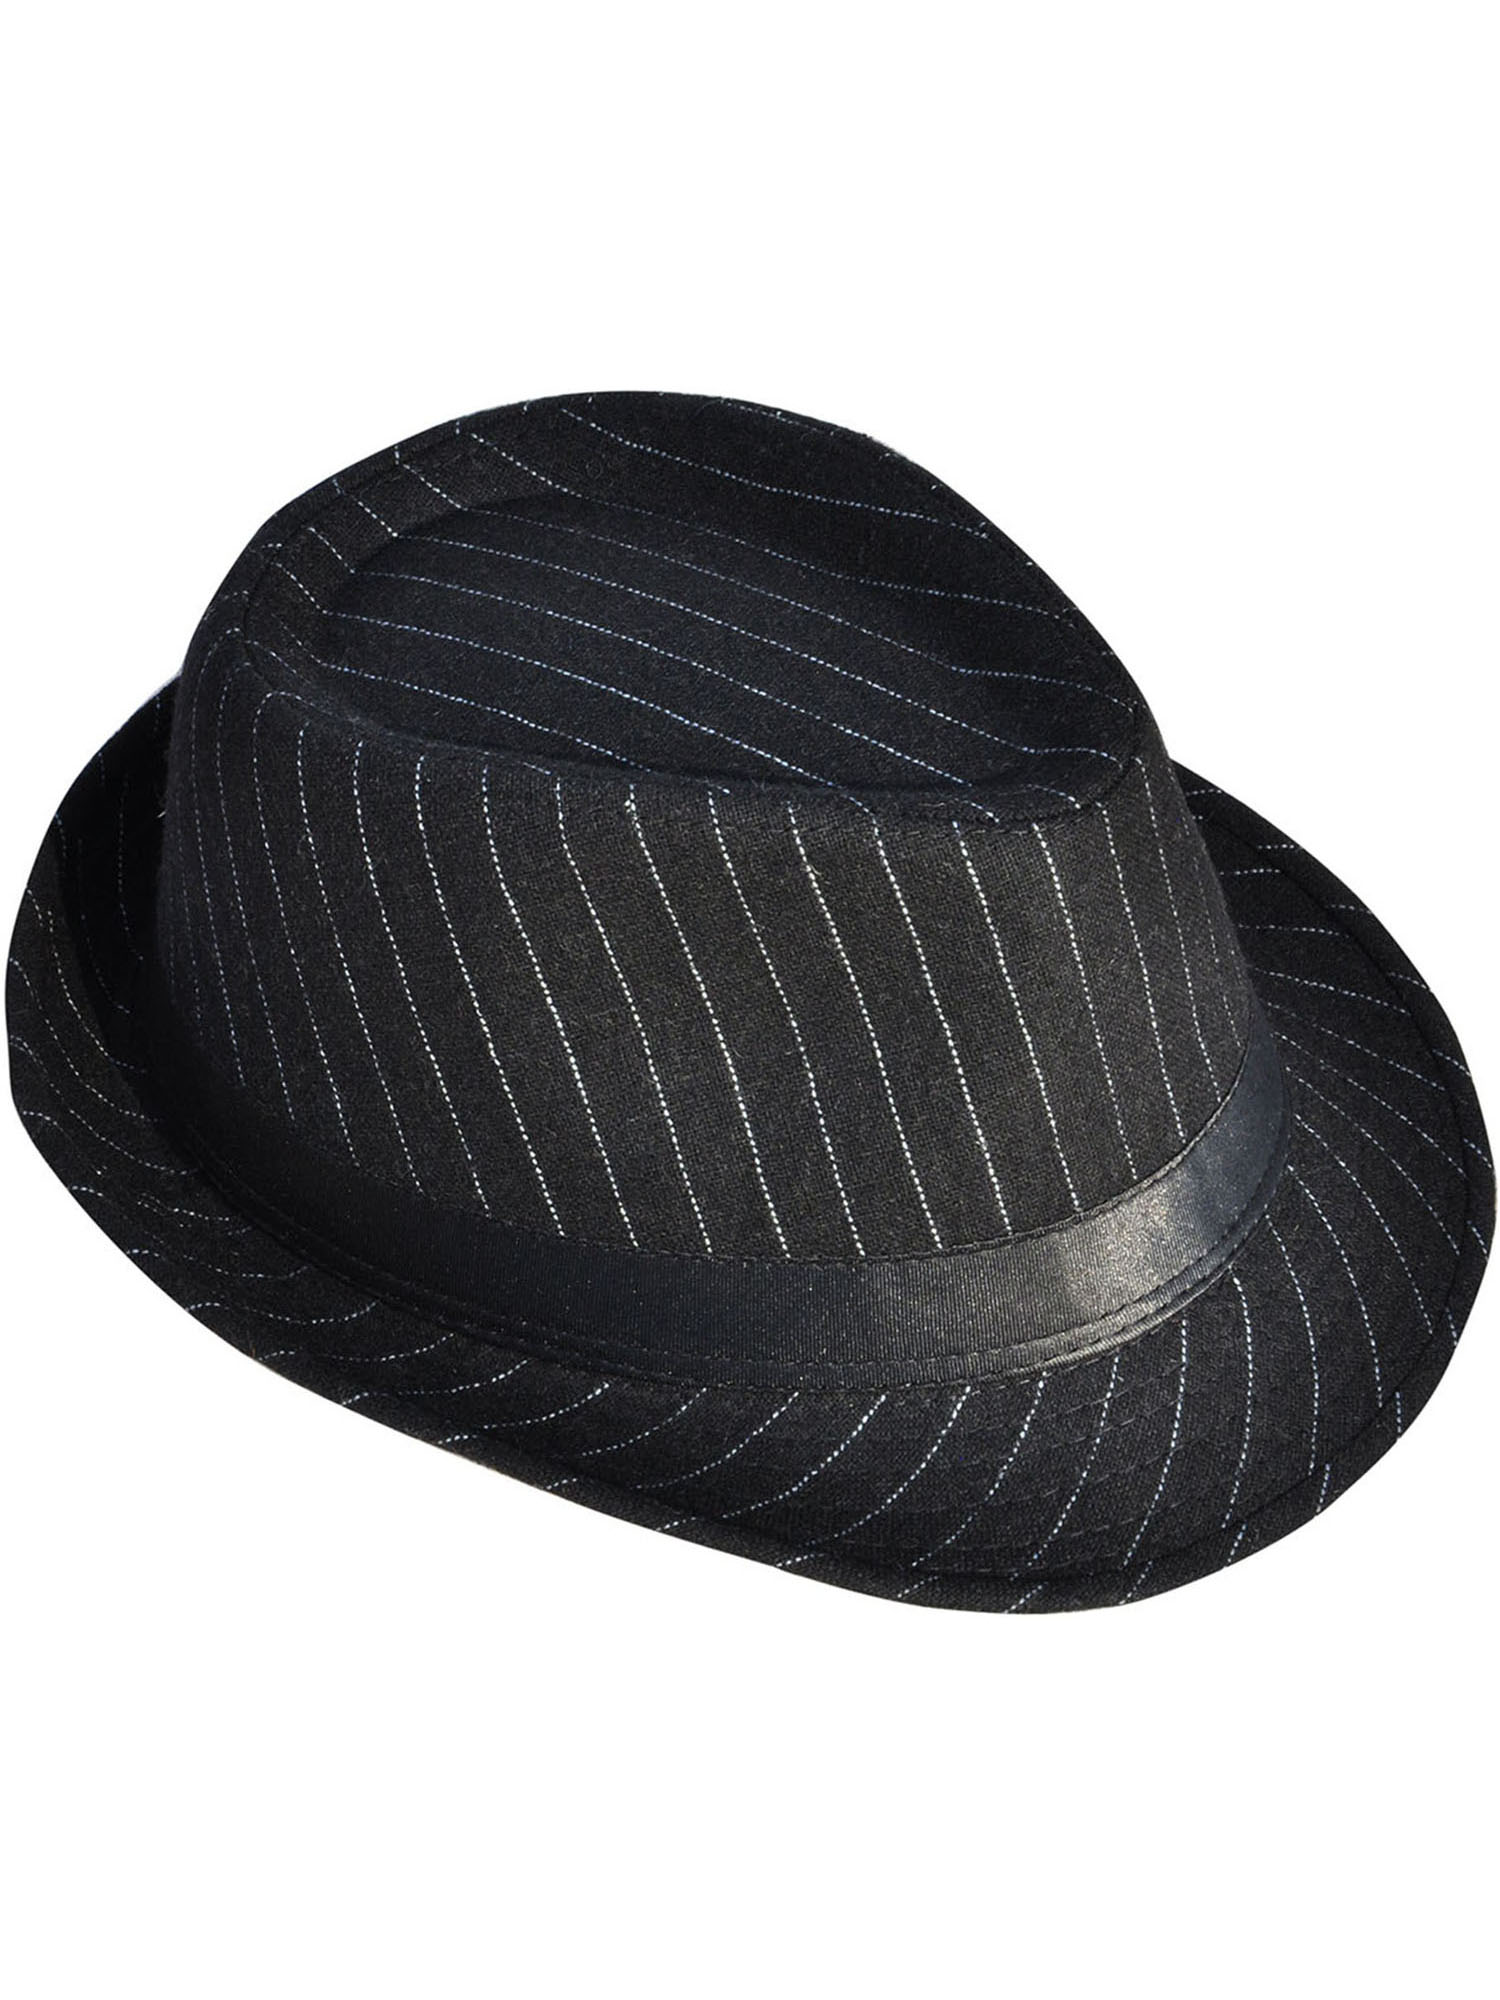 Mens Cool Fedora Trilby Hat Pinstripe with Black Band - image 3 of 4